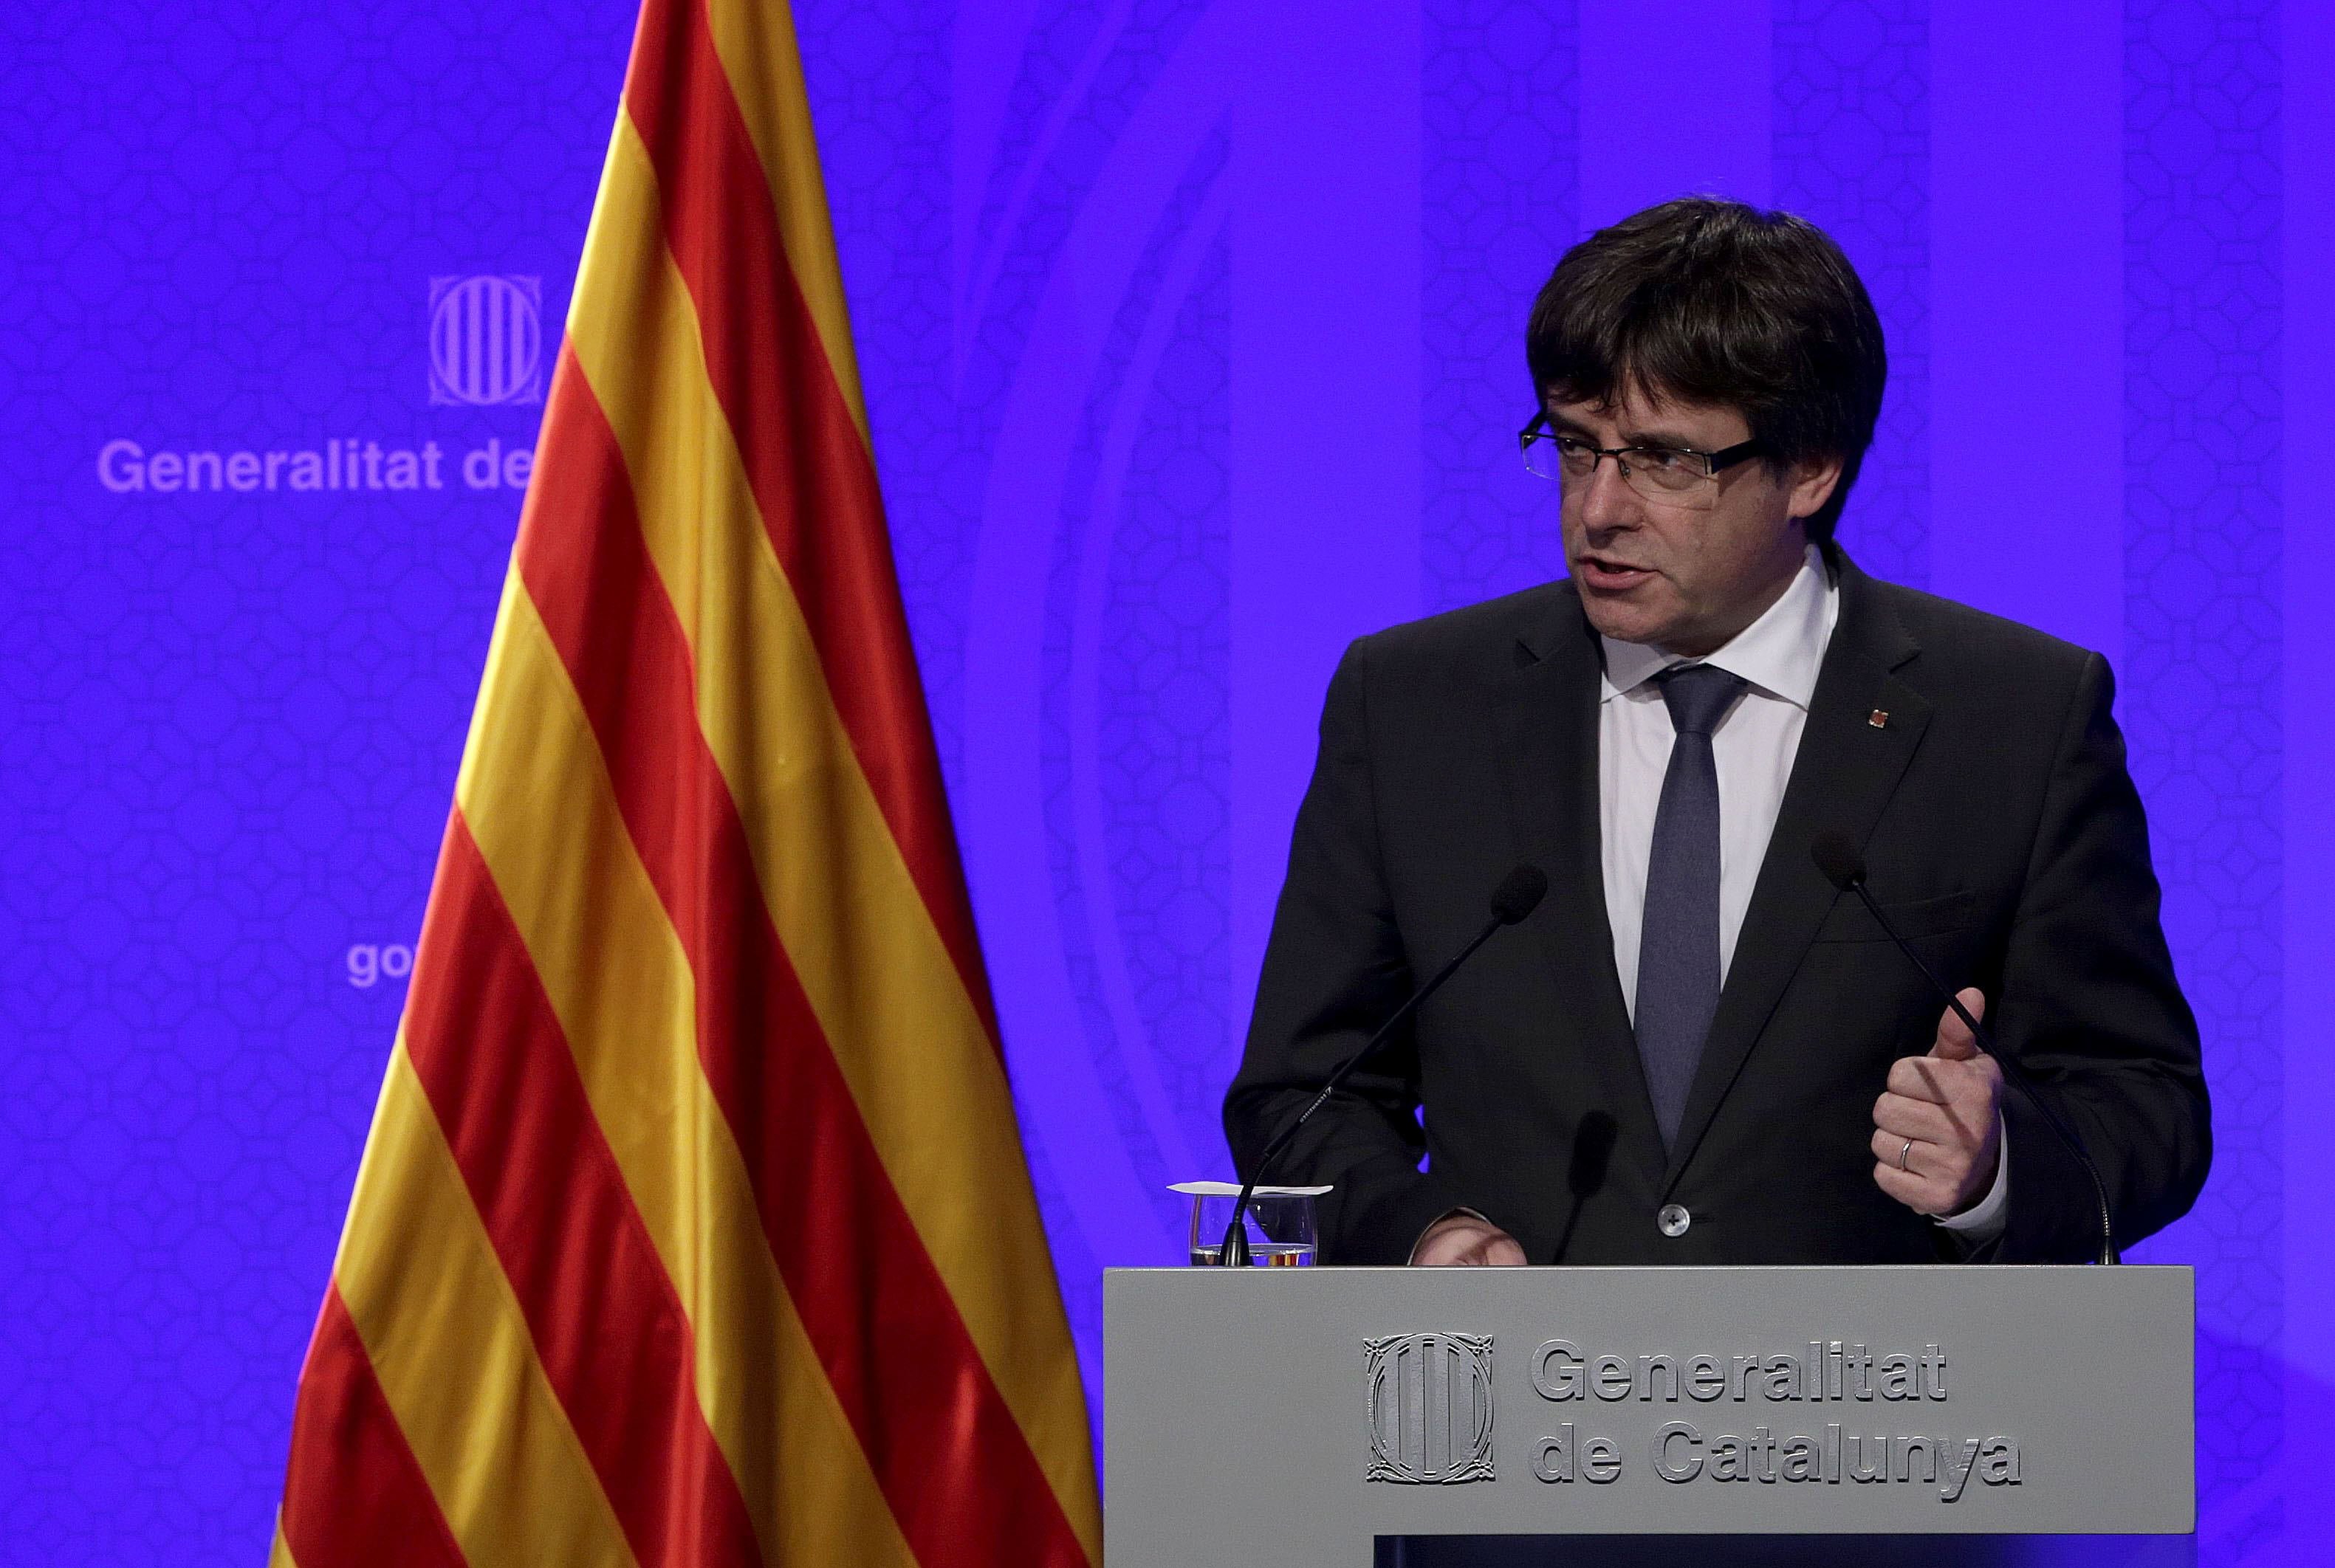 Catalan president Puigdemont tells BBC Catalonia will declare independence in a matter of days